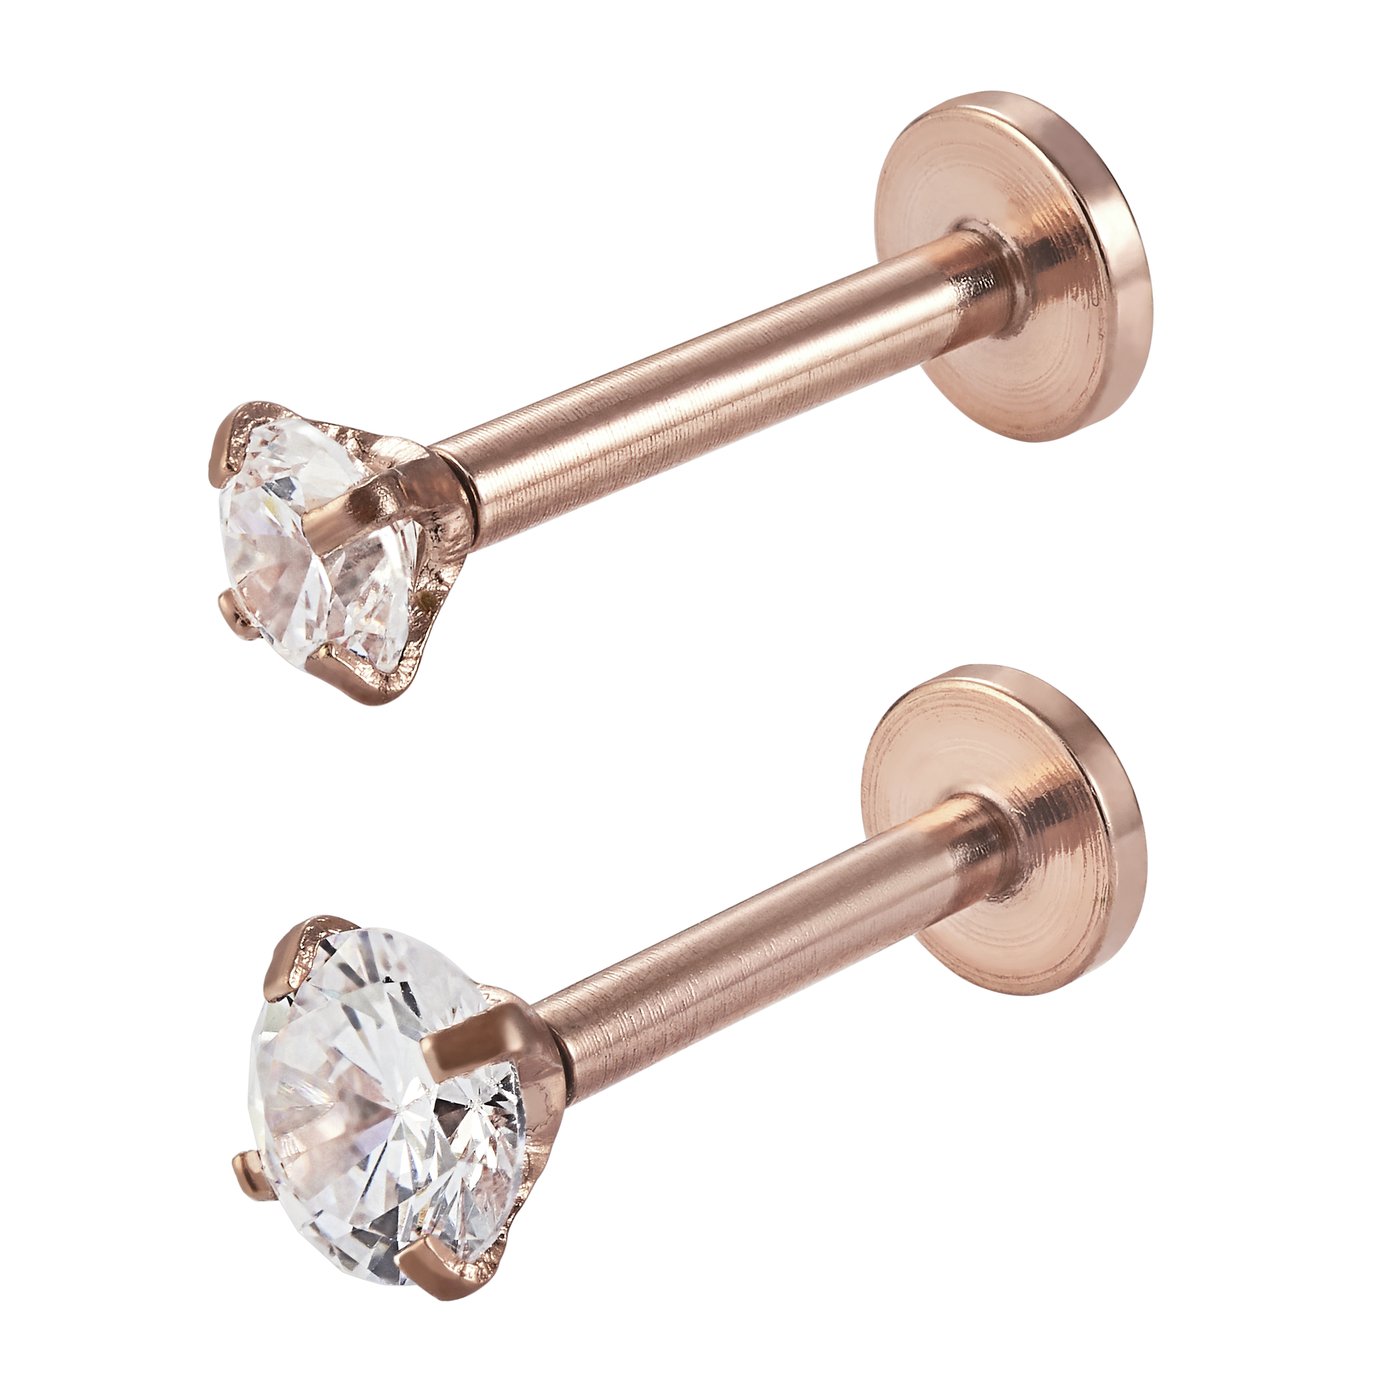 State of Mine Stainless Steel Tragus Rose Gold Earrings review